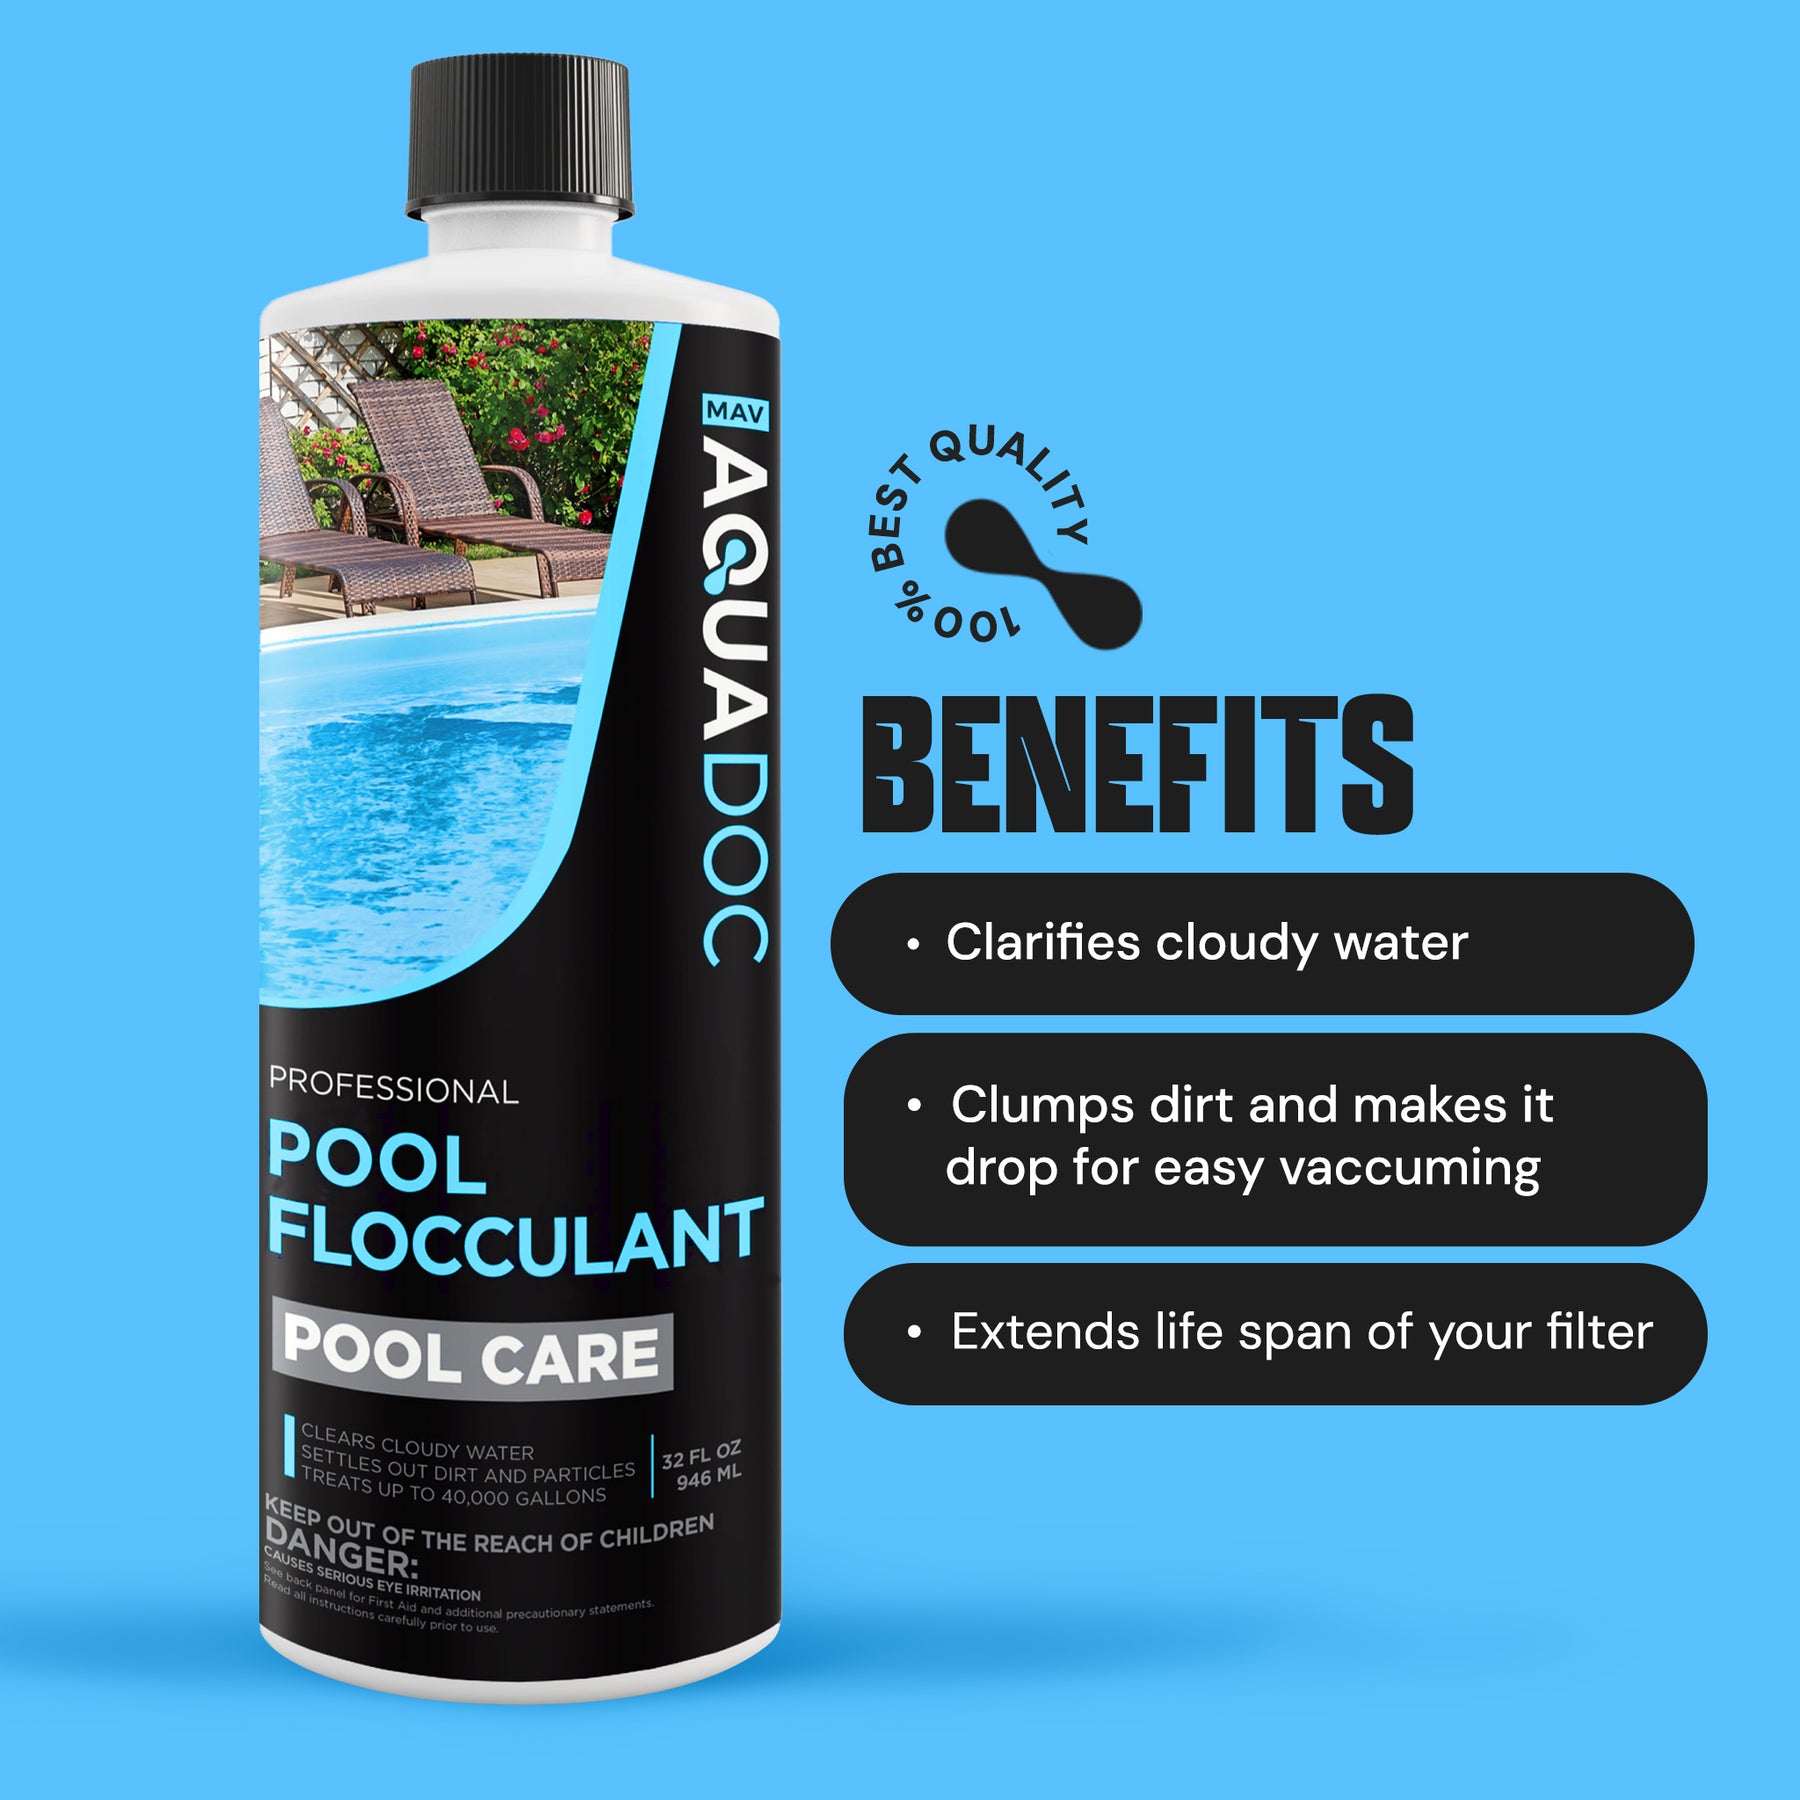 Enjoy Sparkling Pool Water with AquaDoc's Pool Flocculant